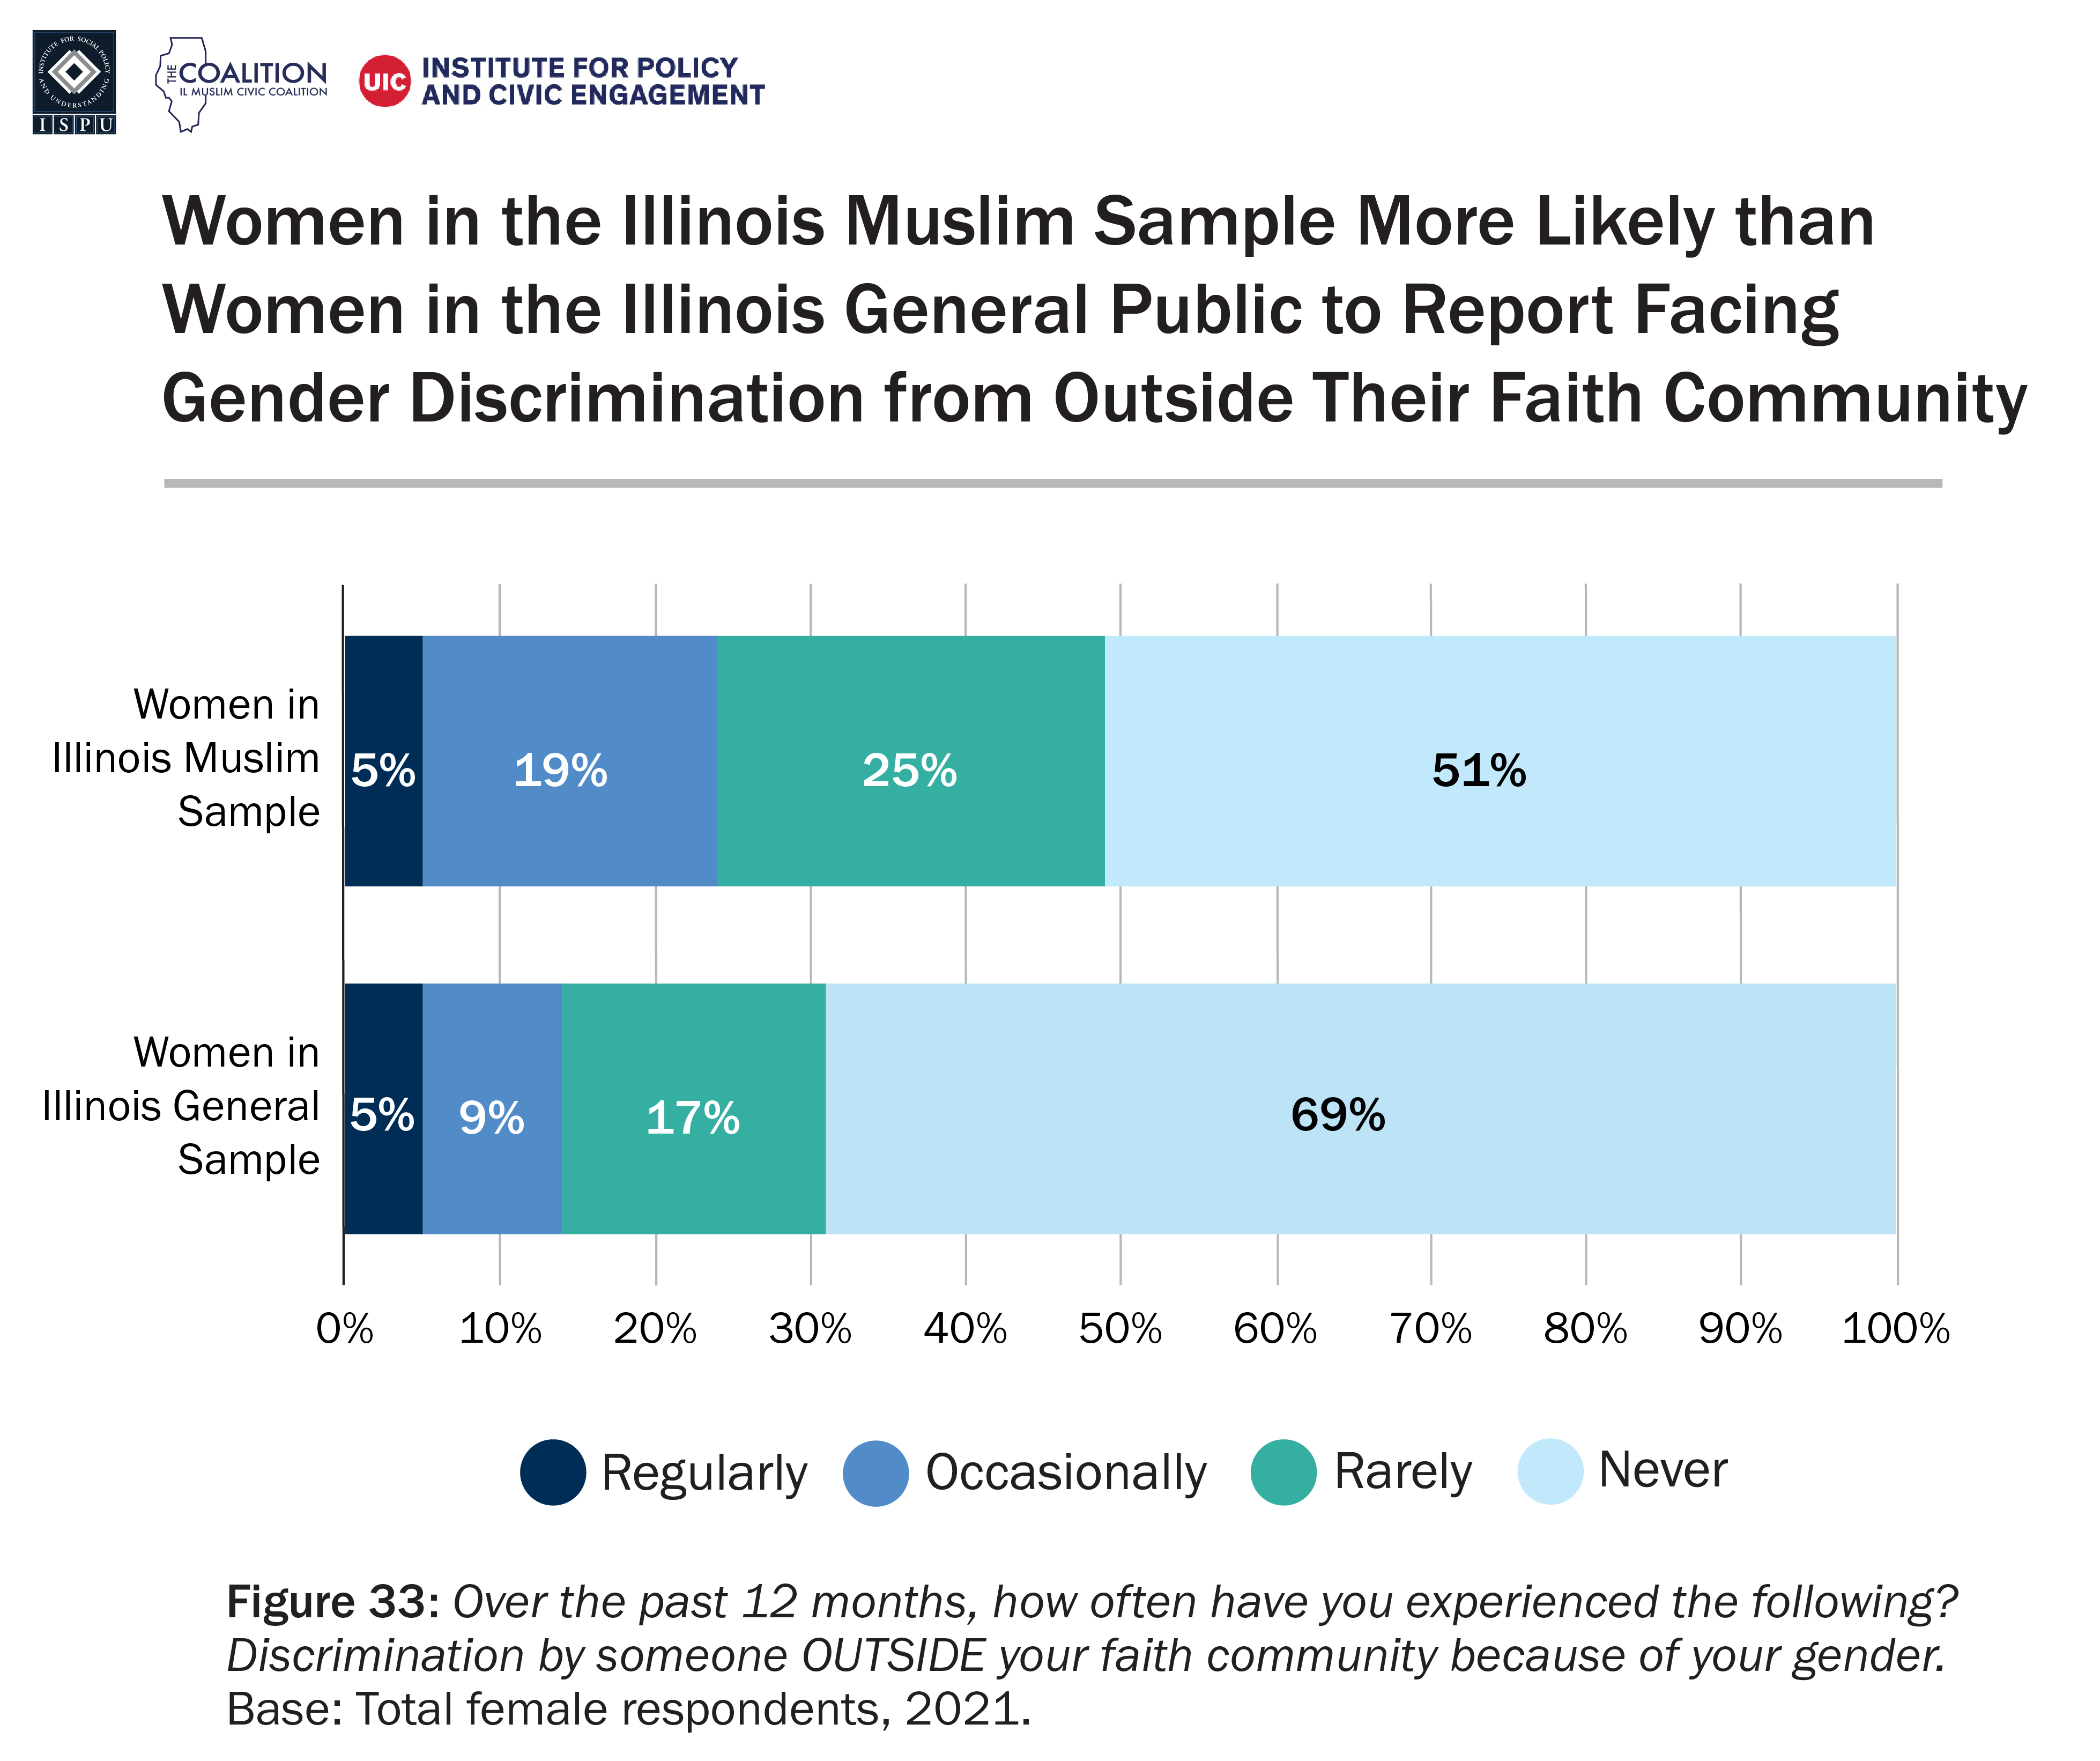 A bar graph showing frequency of gender discrimination by someone outside faith community among women in the Illinois Muslim sample and women in Illinois general public